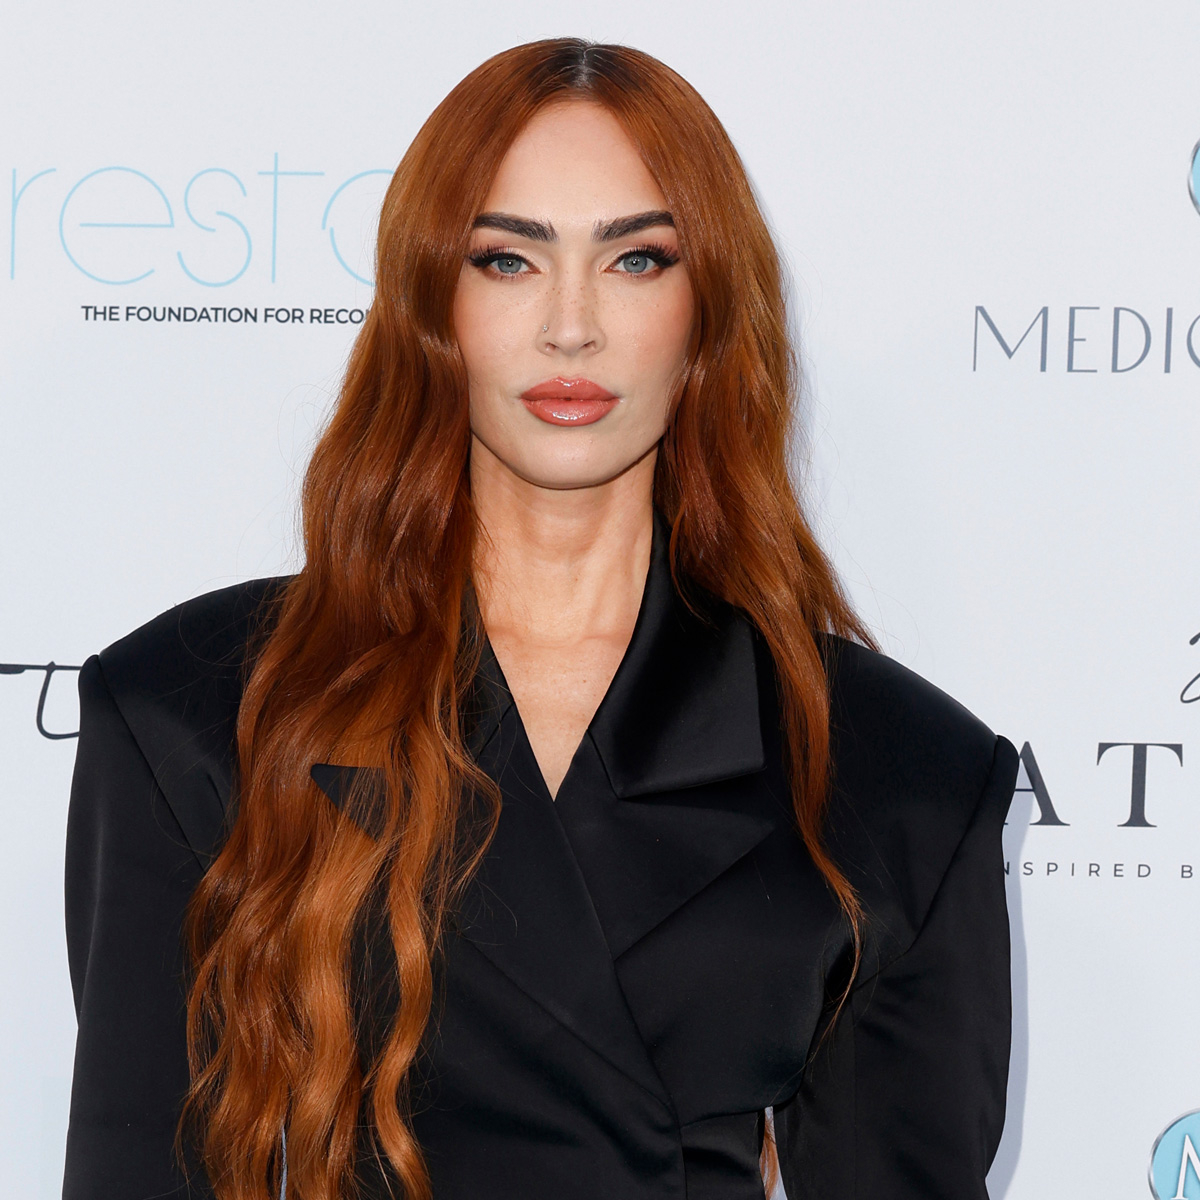 Megan Fox Addresses “Complicated” Relationships Ahead of Book Release